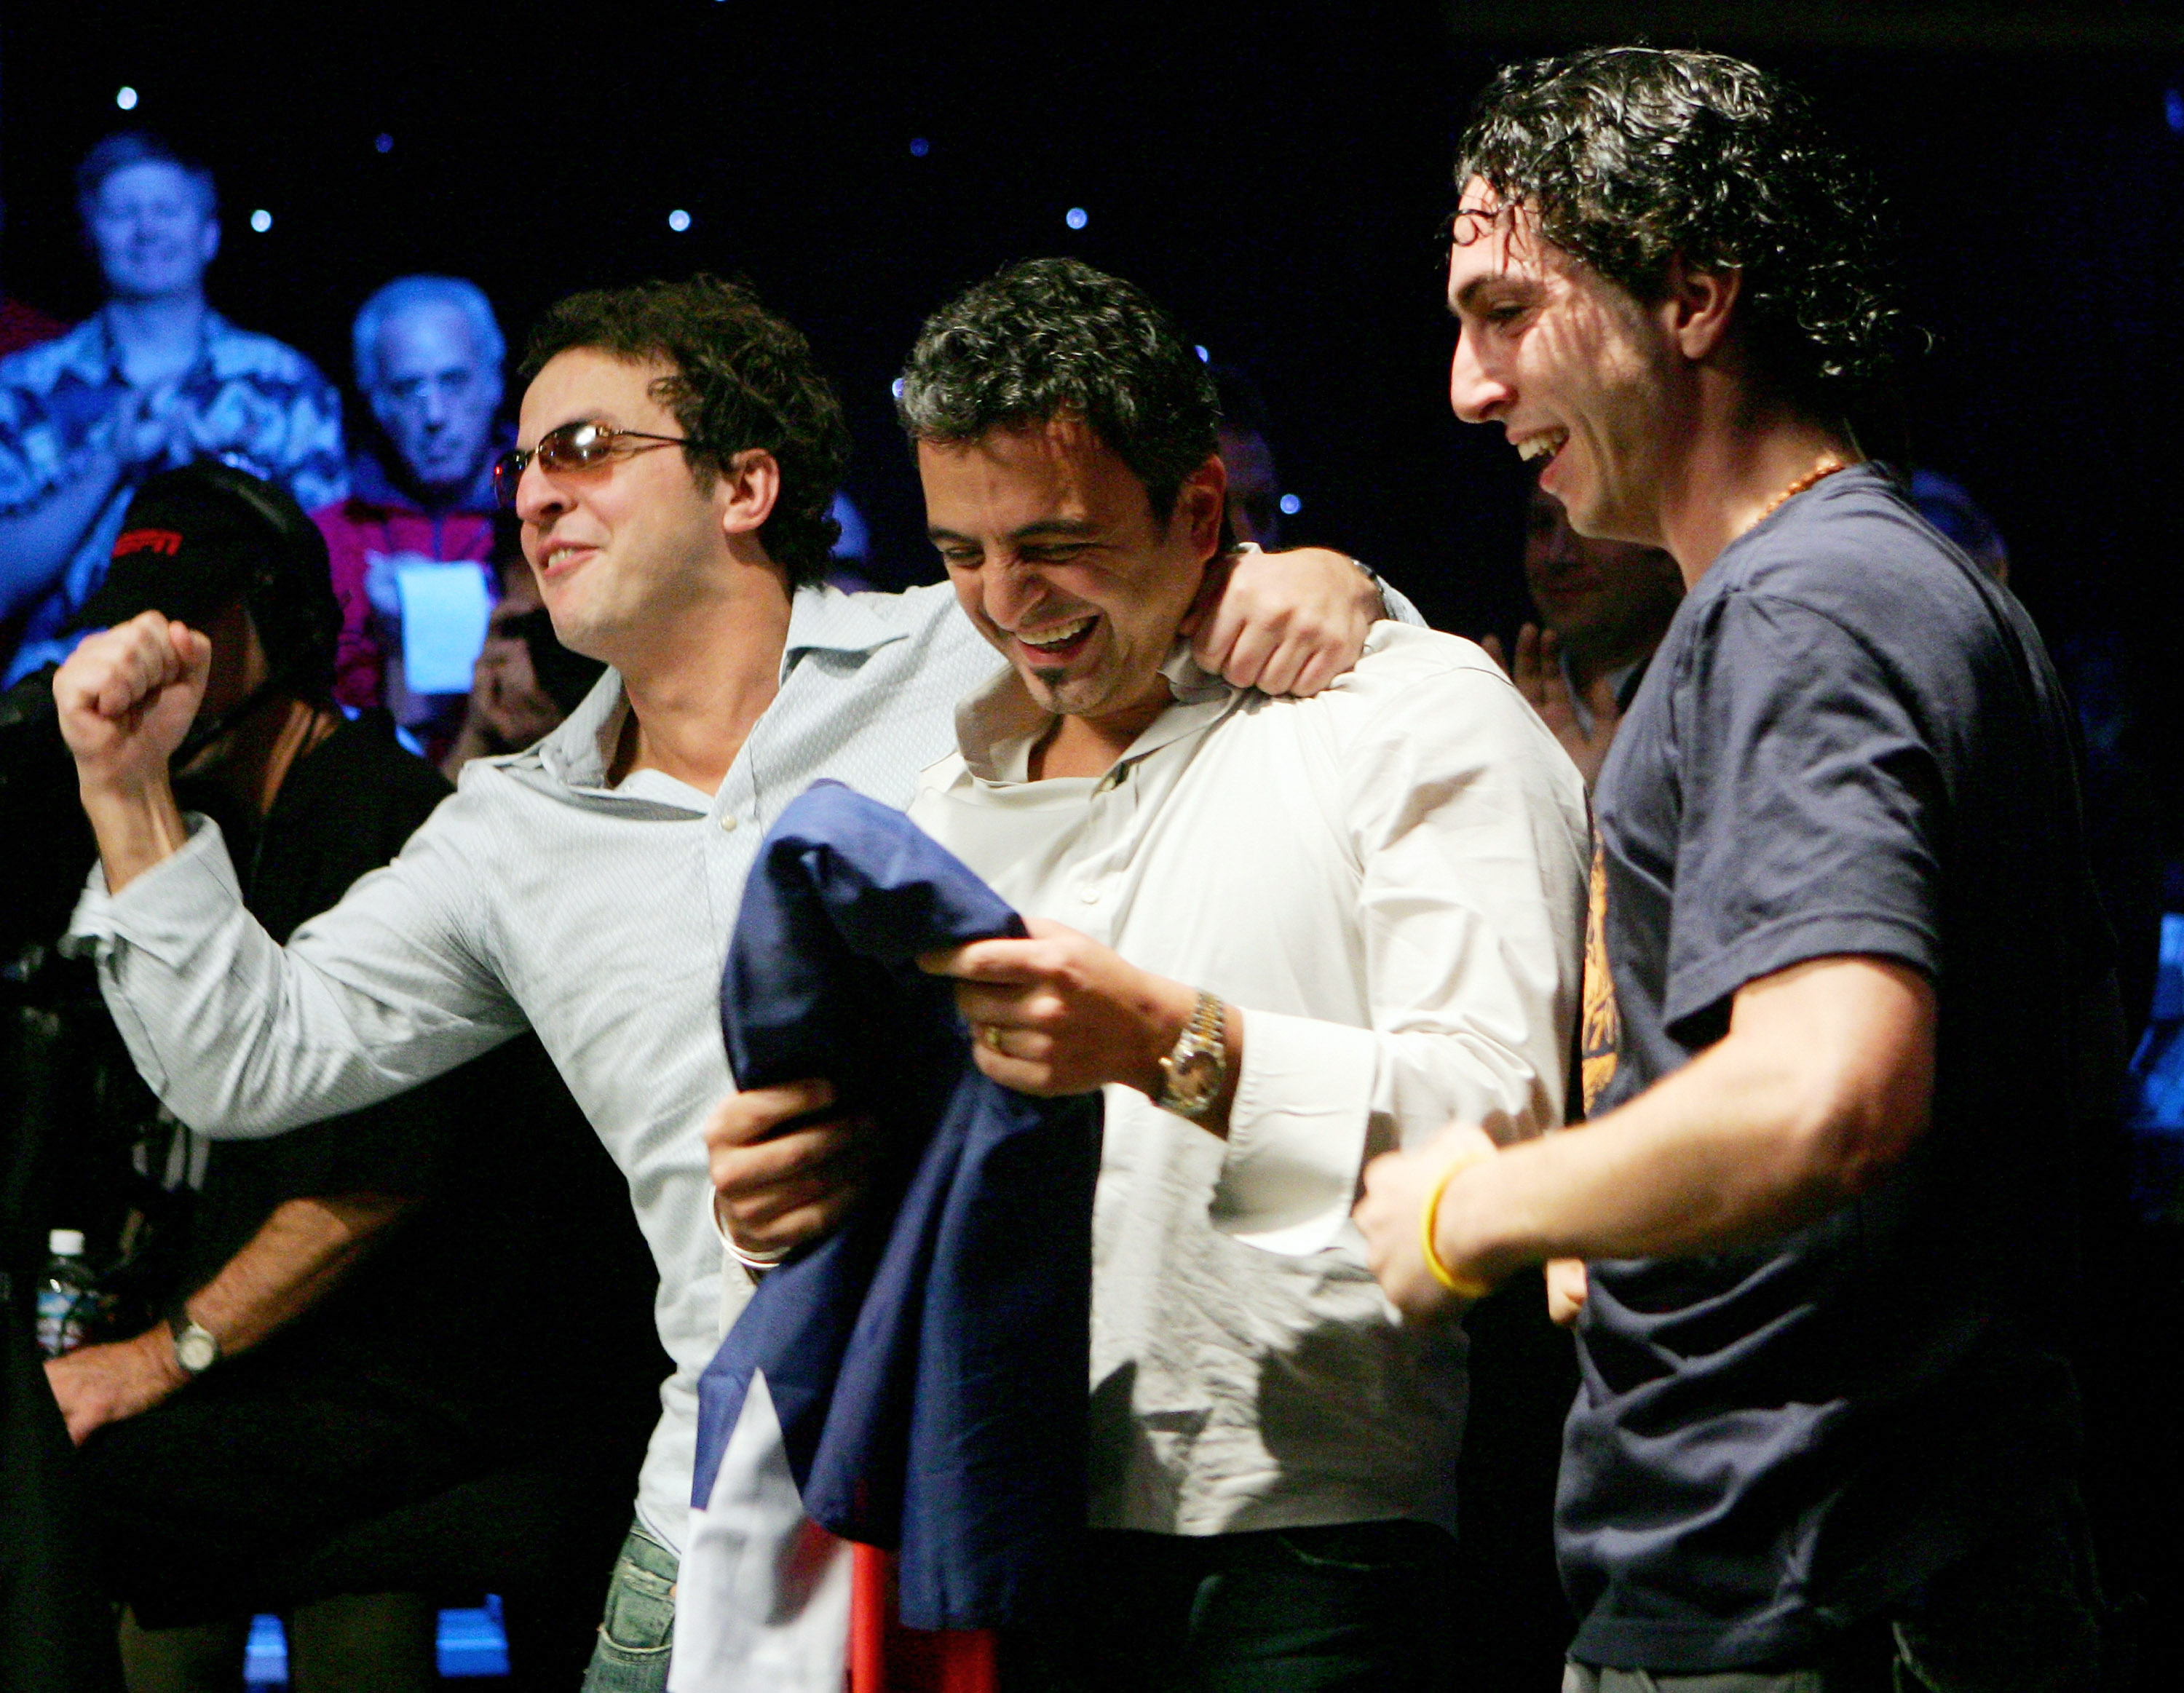 Joe Hachem celebrates his 2005 WSOP Main Event win with his brother Tony and cousin Billy Sukkar. (Image: Getty)